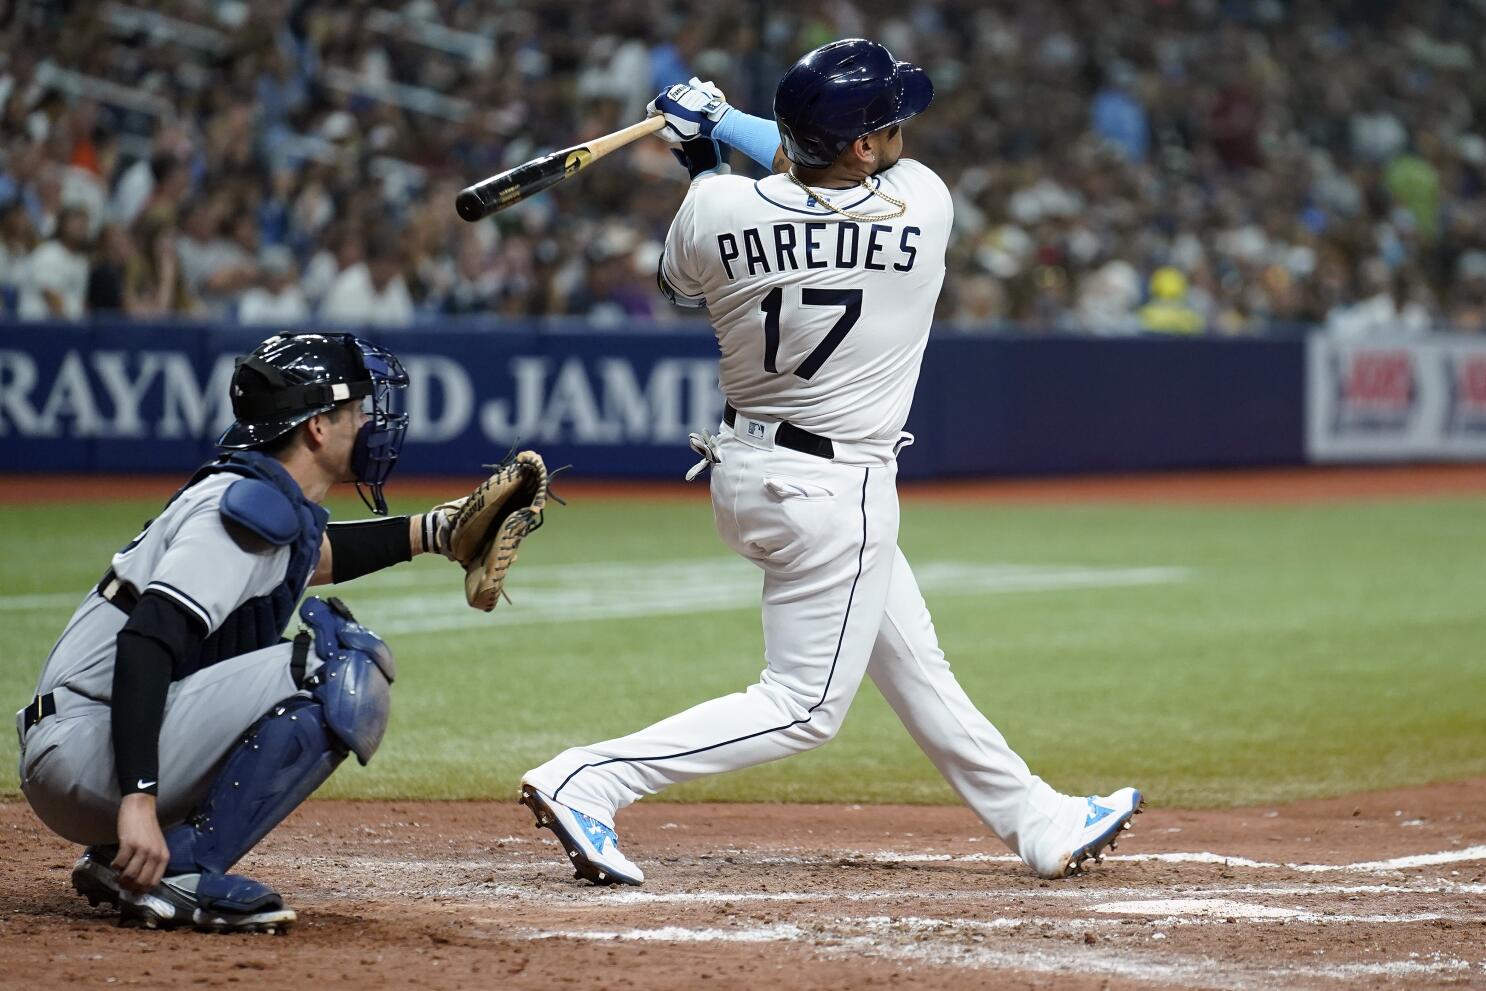 Paredes' 3 homers lift Rays 5-4, Yanks' 3rd loss in 20 games - The San  Diego Union-Tribune